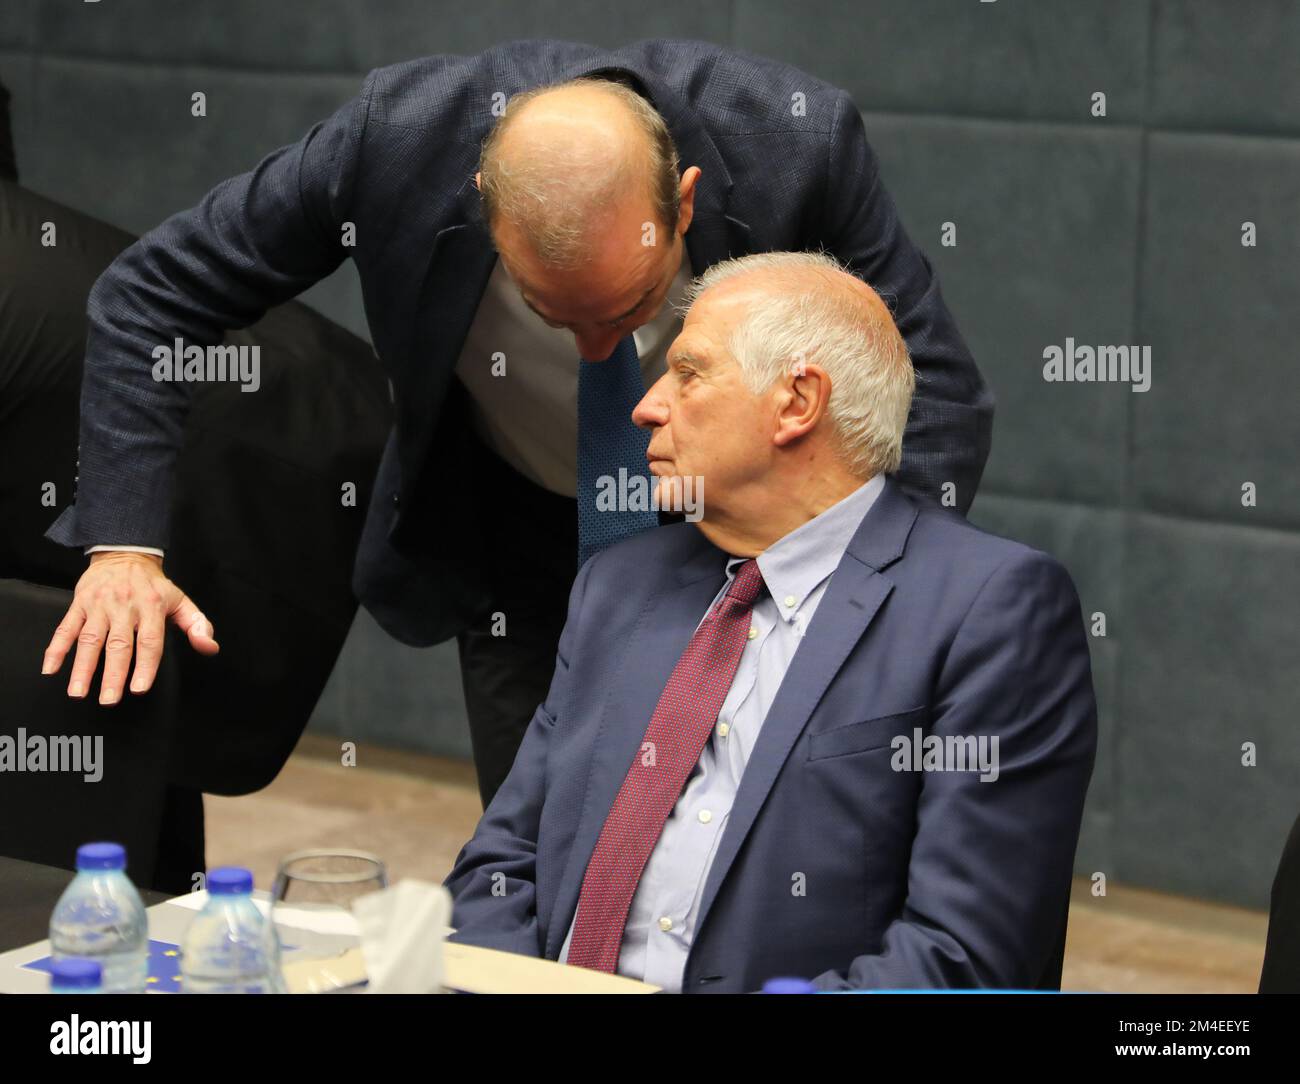 Iranian Foreign Minister Hossein Amir-Abdollahian (not seen) meets with European Union (EU) Foreign Policy Chief Josep Borrell (R) ahead of the second Baghdad conference in Sweimeh by the Dead Sea shore in central-west Jordan on December 20, 2022. Borrell twitted after his meeting with Amir-Abdollahian that, it was a necessary' talk amid 'deteriorating Iran-EU relations, he added, stressed need to immediately stop military support to Russia and internal repression in Iran, adding that, the two sides agreed to keep talking with the aim of restoring the Joint Comprehensive Plan of Action (JCPOA Stock Photo